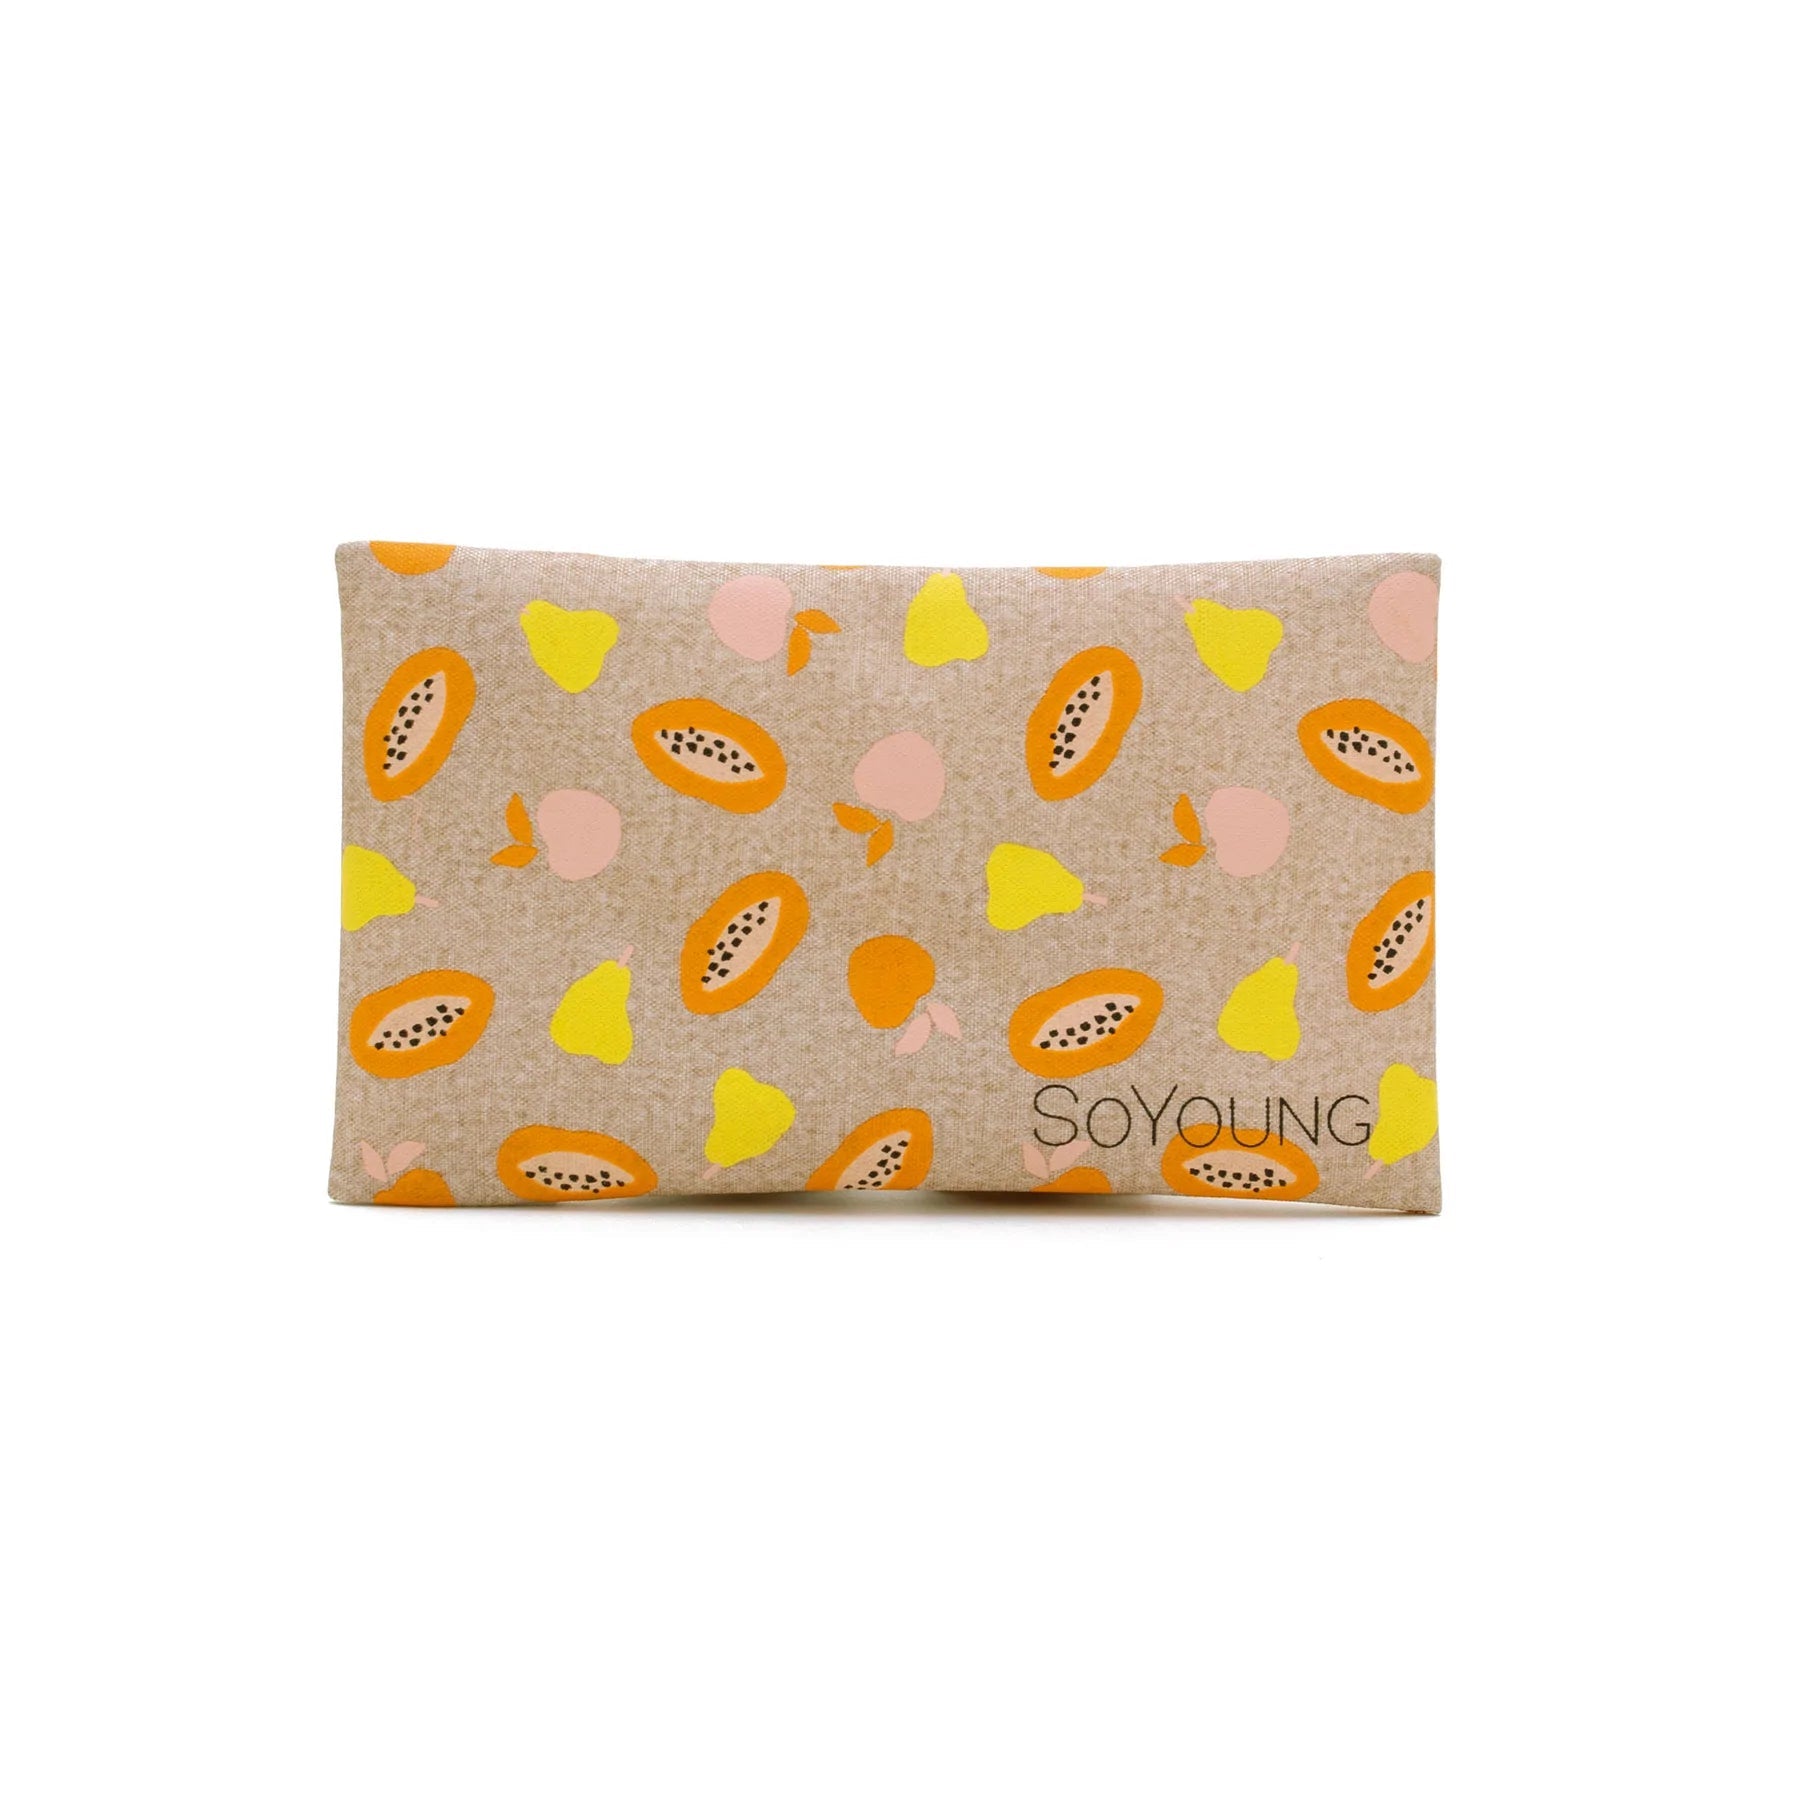 Ice pack - Condensation Free on the go SoYoung Papaya Party Prettycleanshop